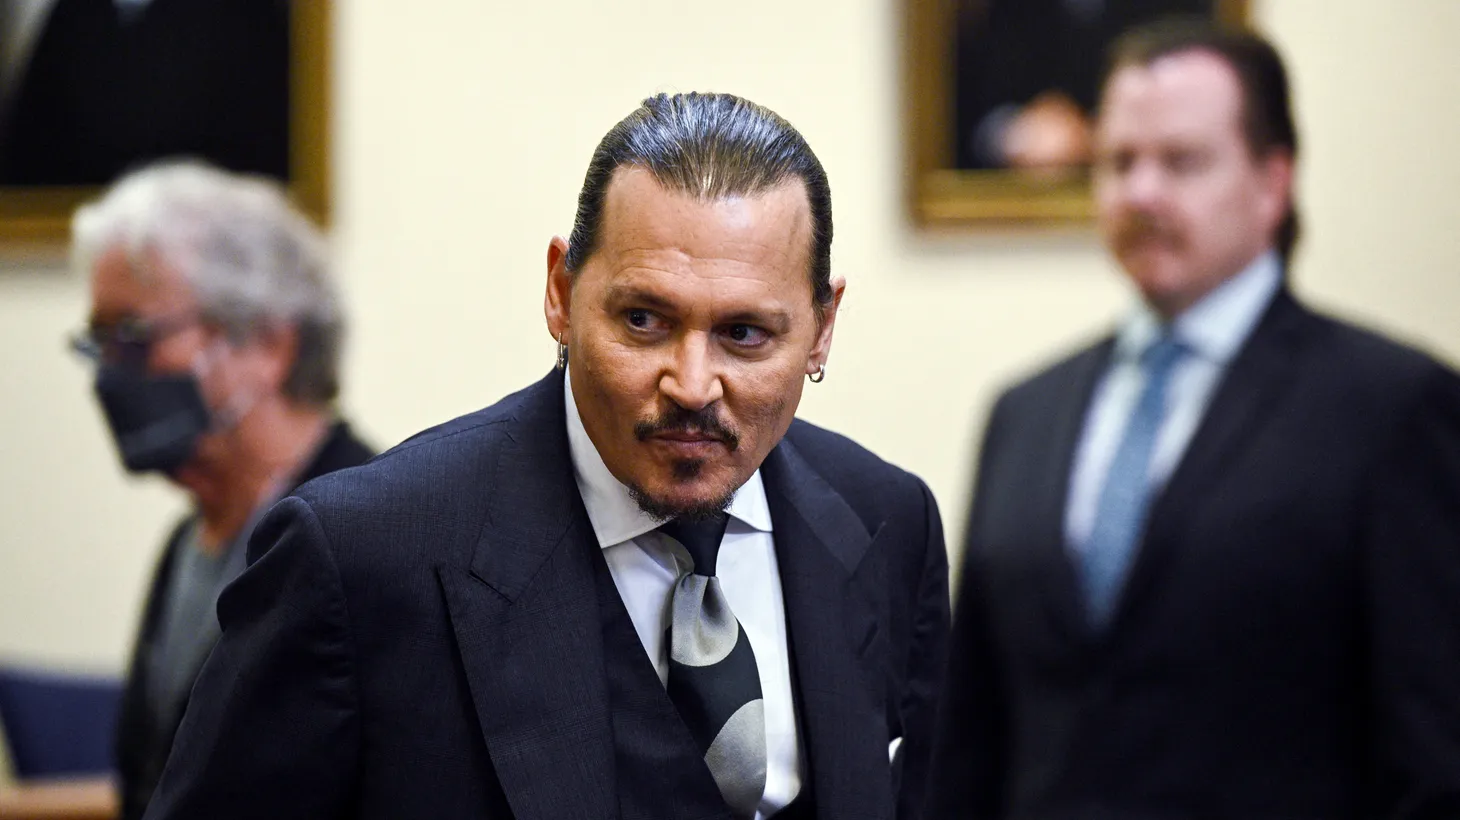 Actor Johnny Depp returns to the courtroom after a break during his defamation case against ex-wife Amber Heard at the Fairfax County Circuit Court in Fairfax, Virginia, U.S., April 14, 2022.